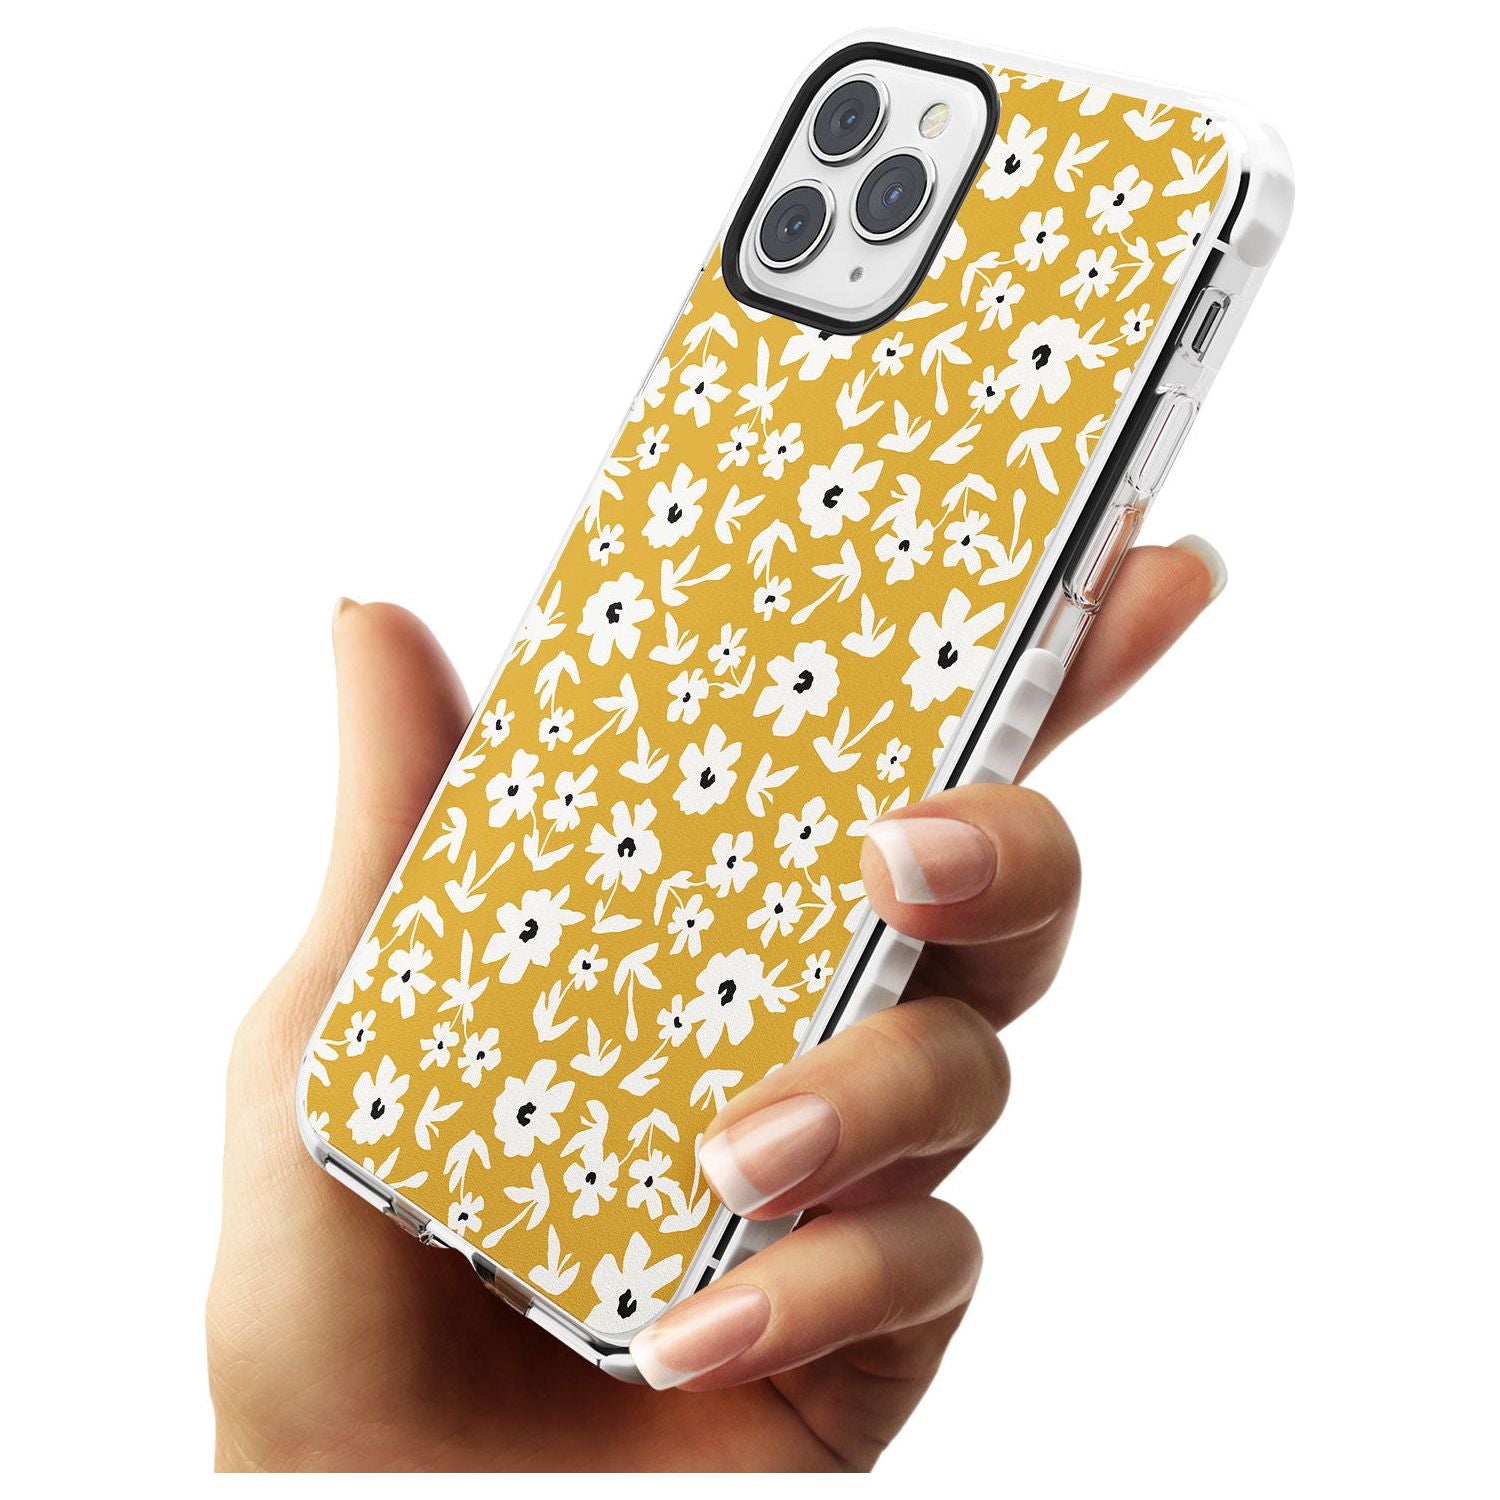 Floral Print on Mustard - Cute Floral Design Slim TPU Phone Case for iPhone 11 Pro Max